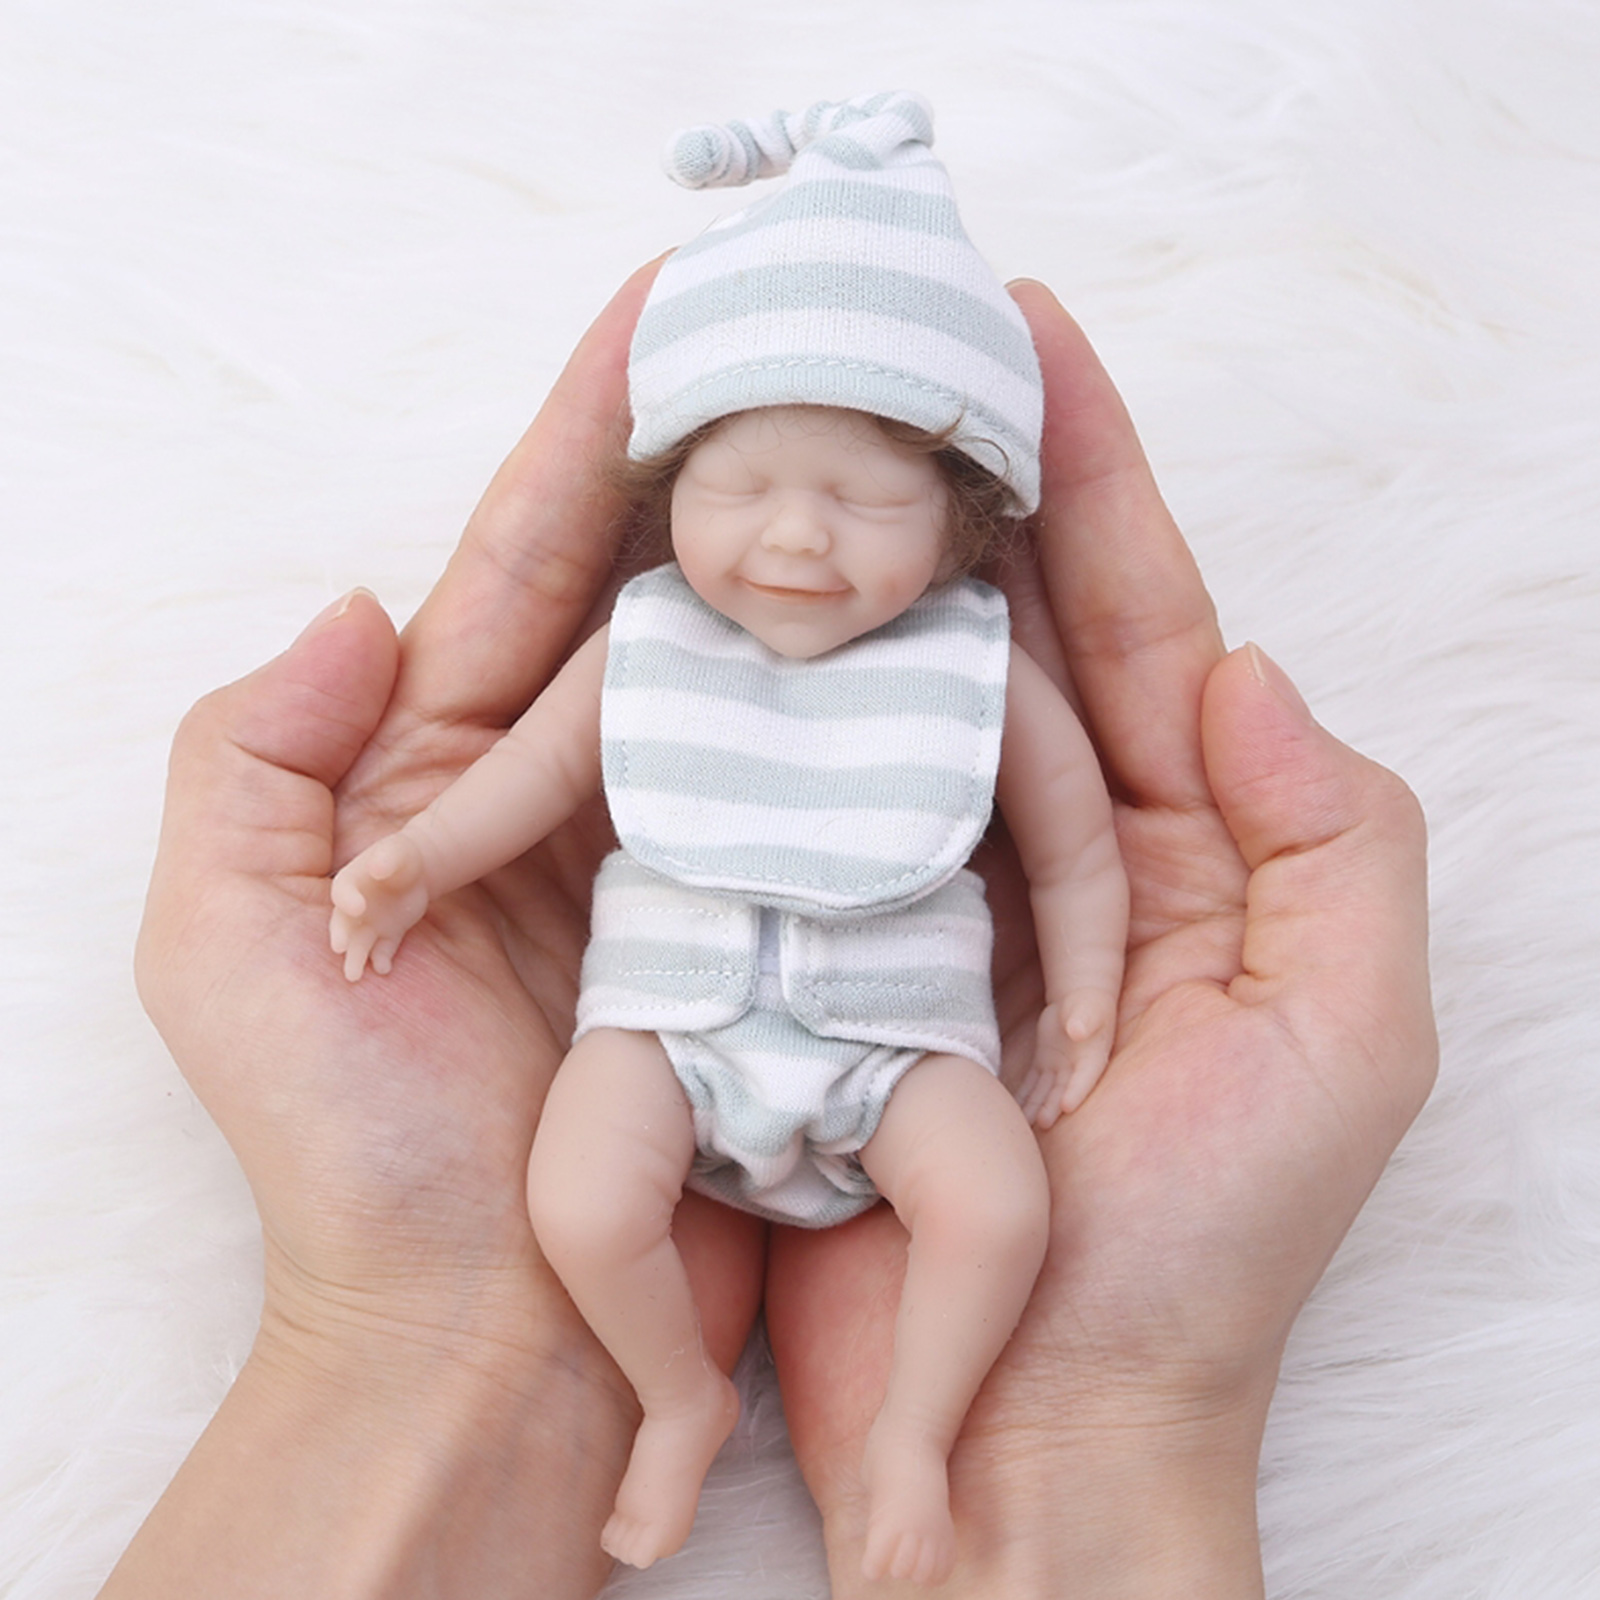 Mini 6 inches Simulated Infant Doll